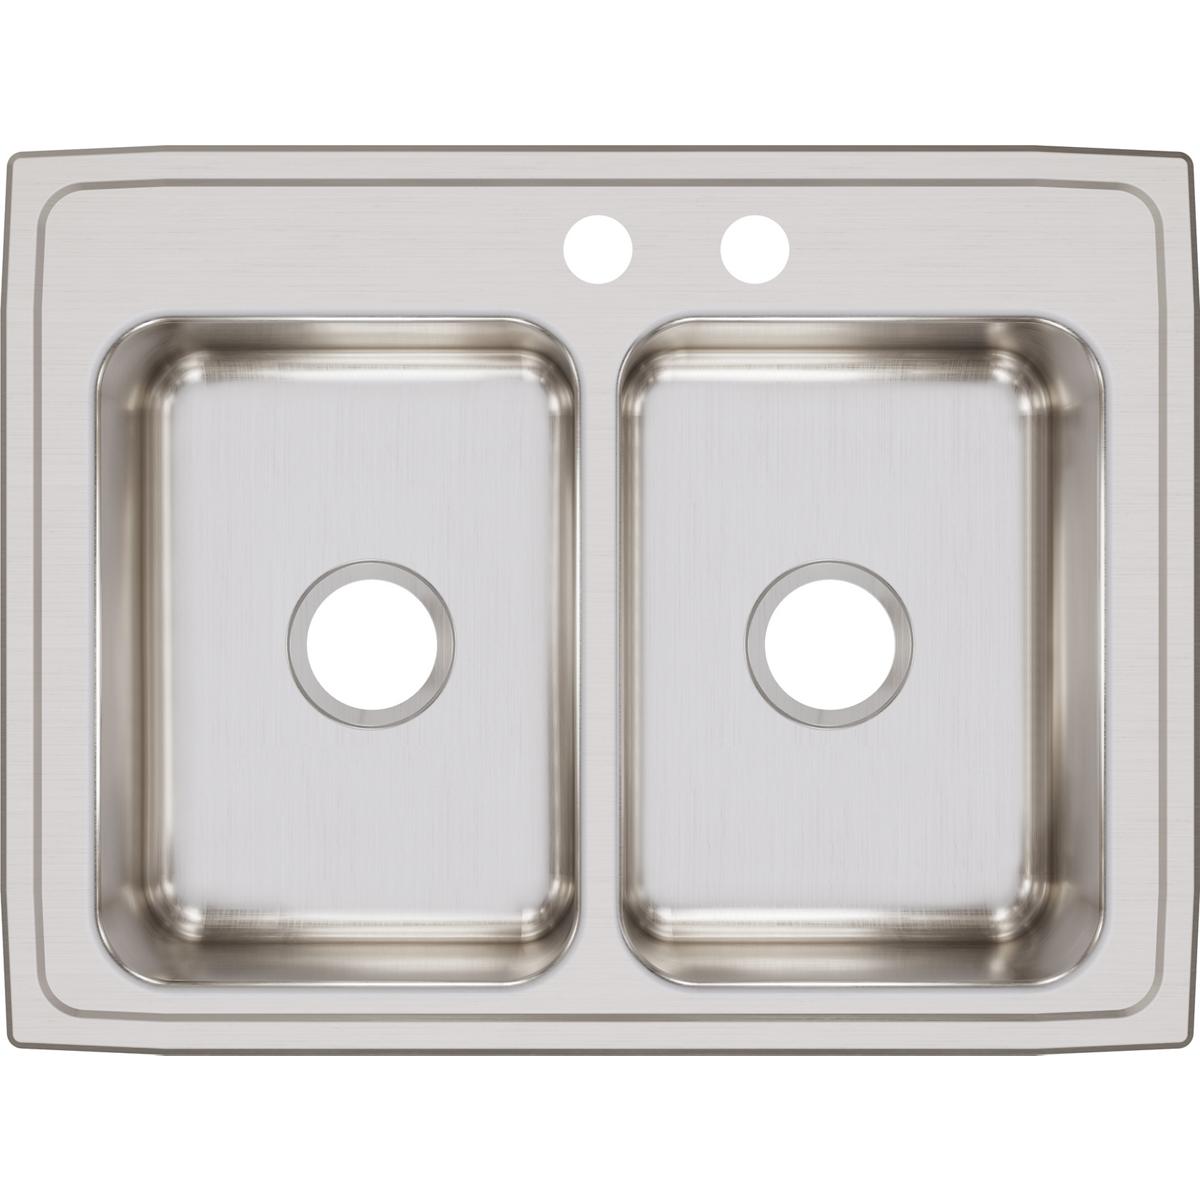 Elkay Lustertone Classic 29" x 22" x 7-5/8" Equal Double Bowl Drop-in Stainless Steel Sink